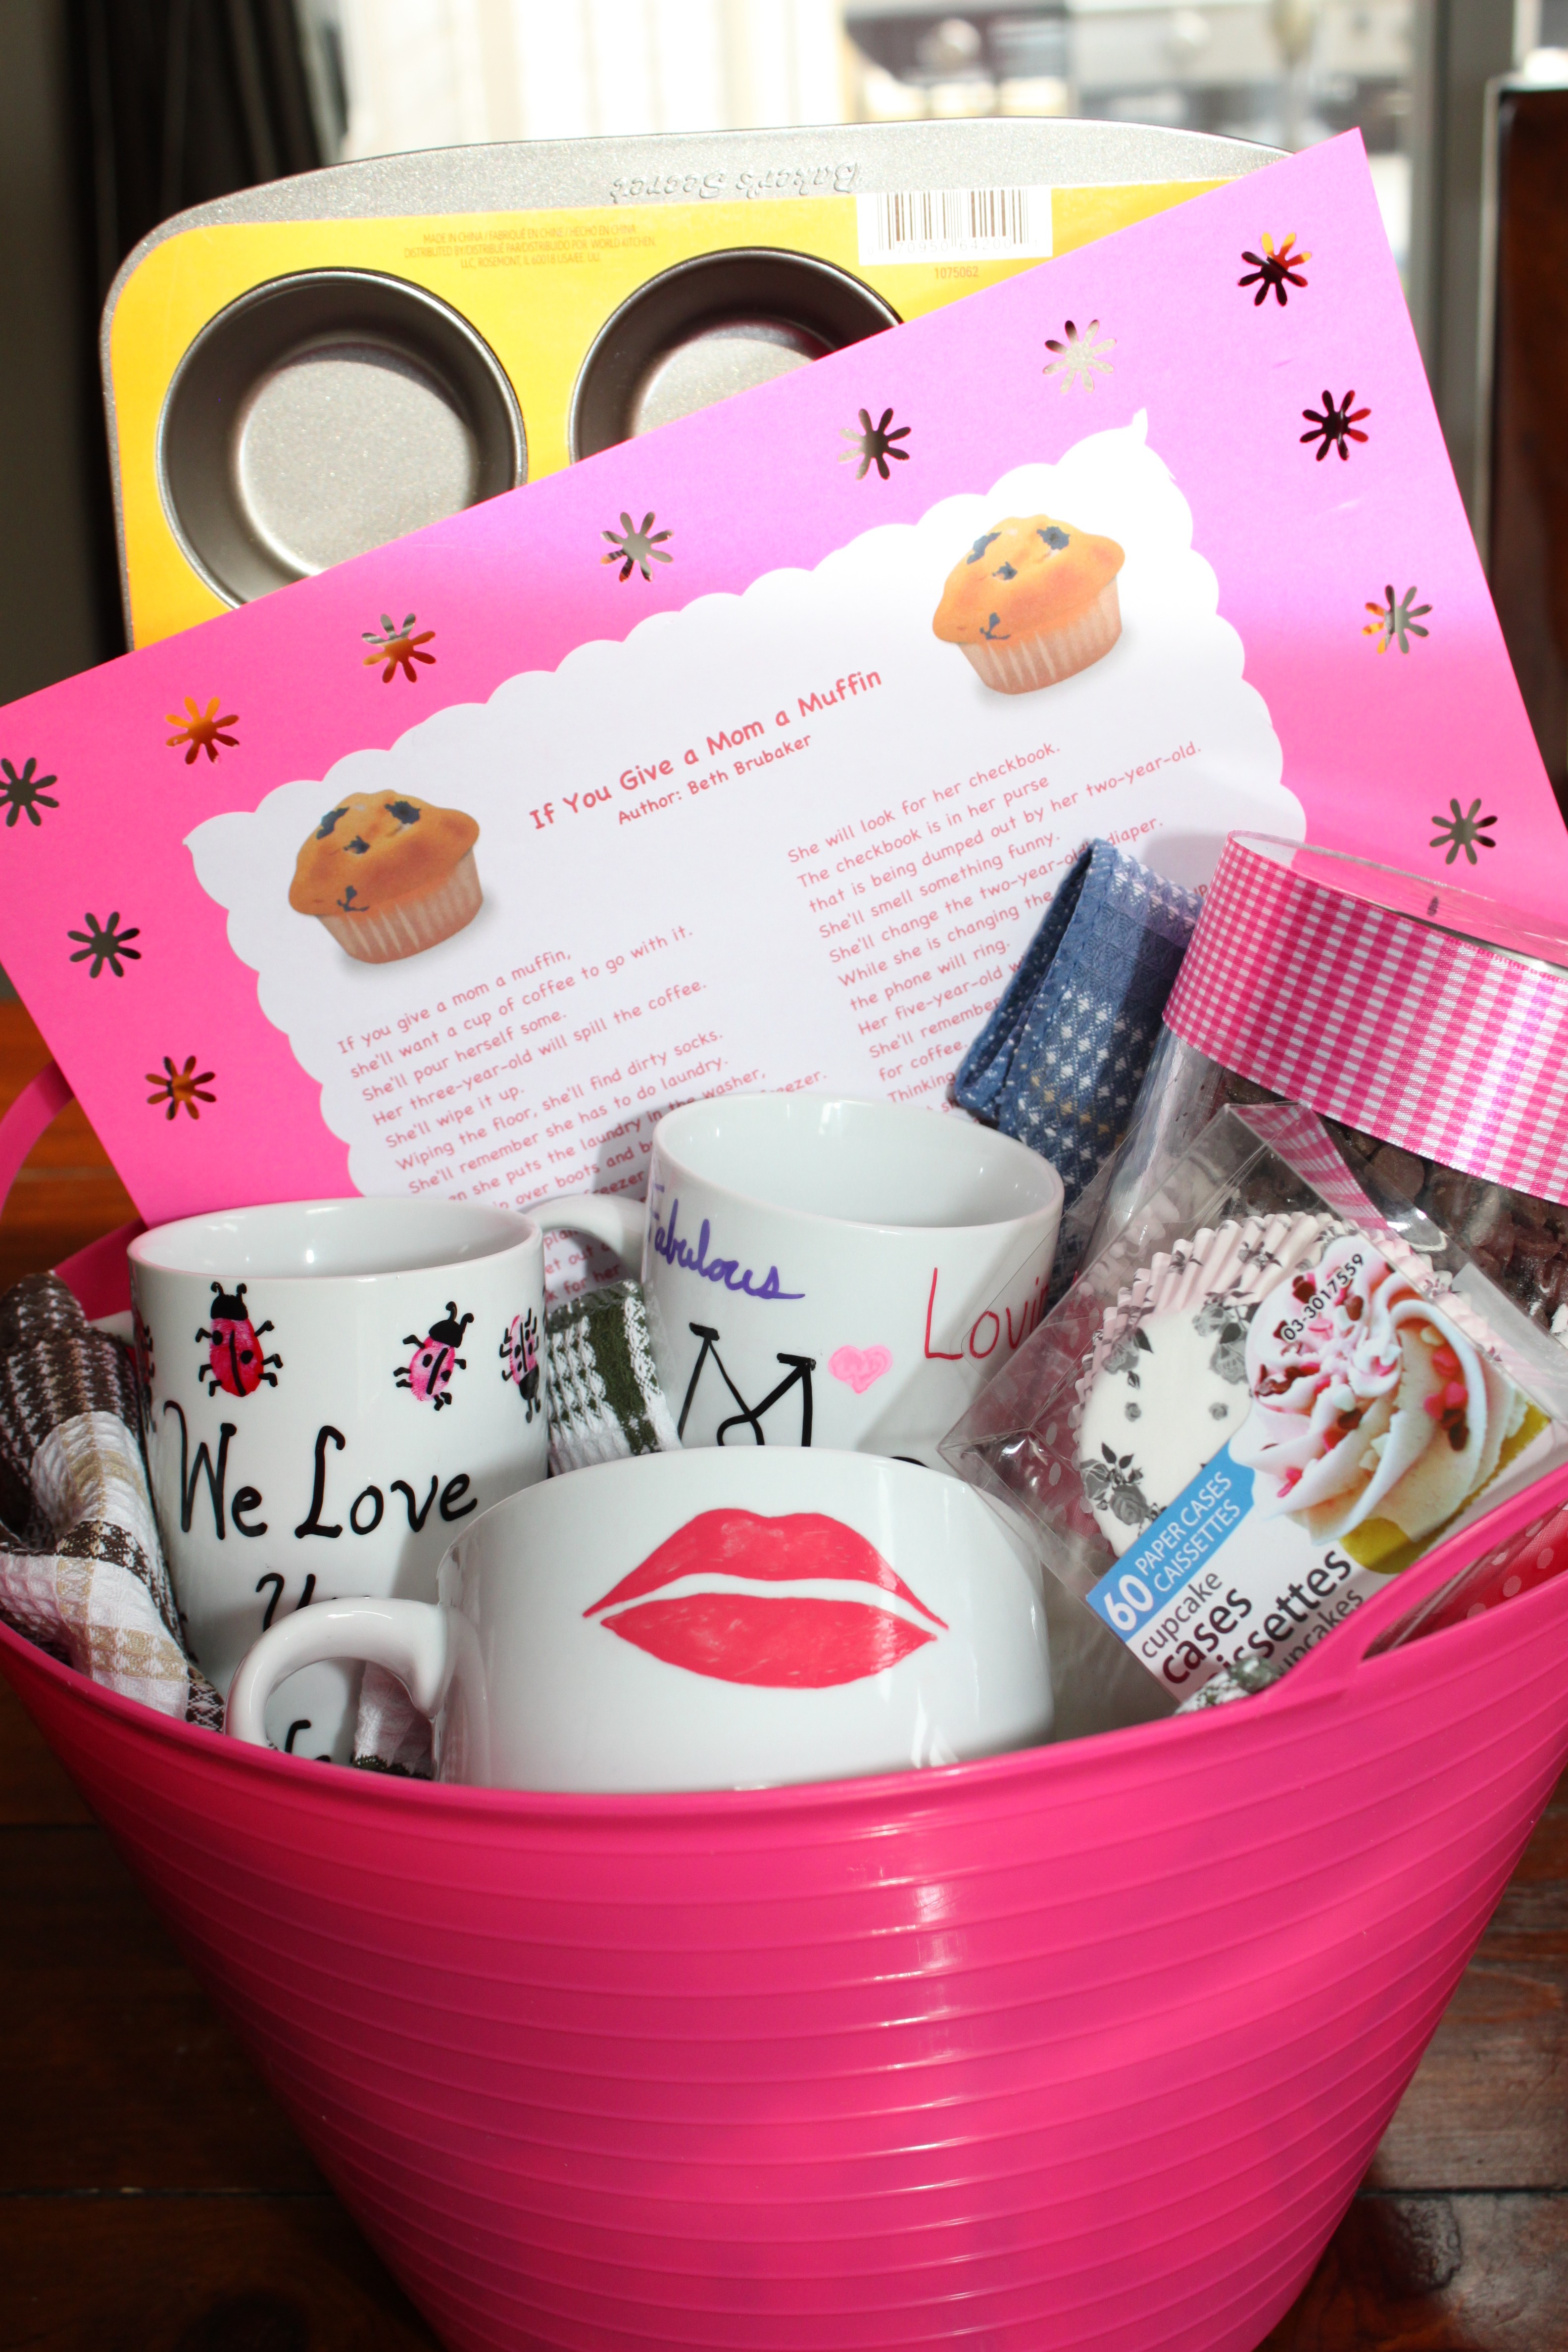 The Best Gift Baskets Ideas for Mom - Home, Family, Style and Art Ideas